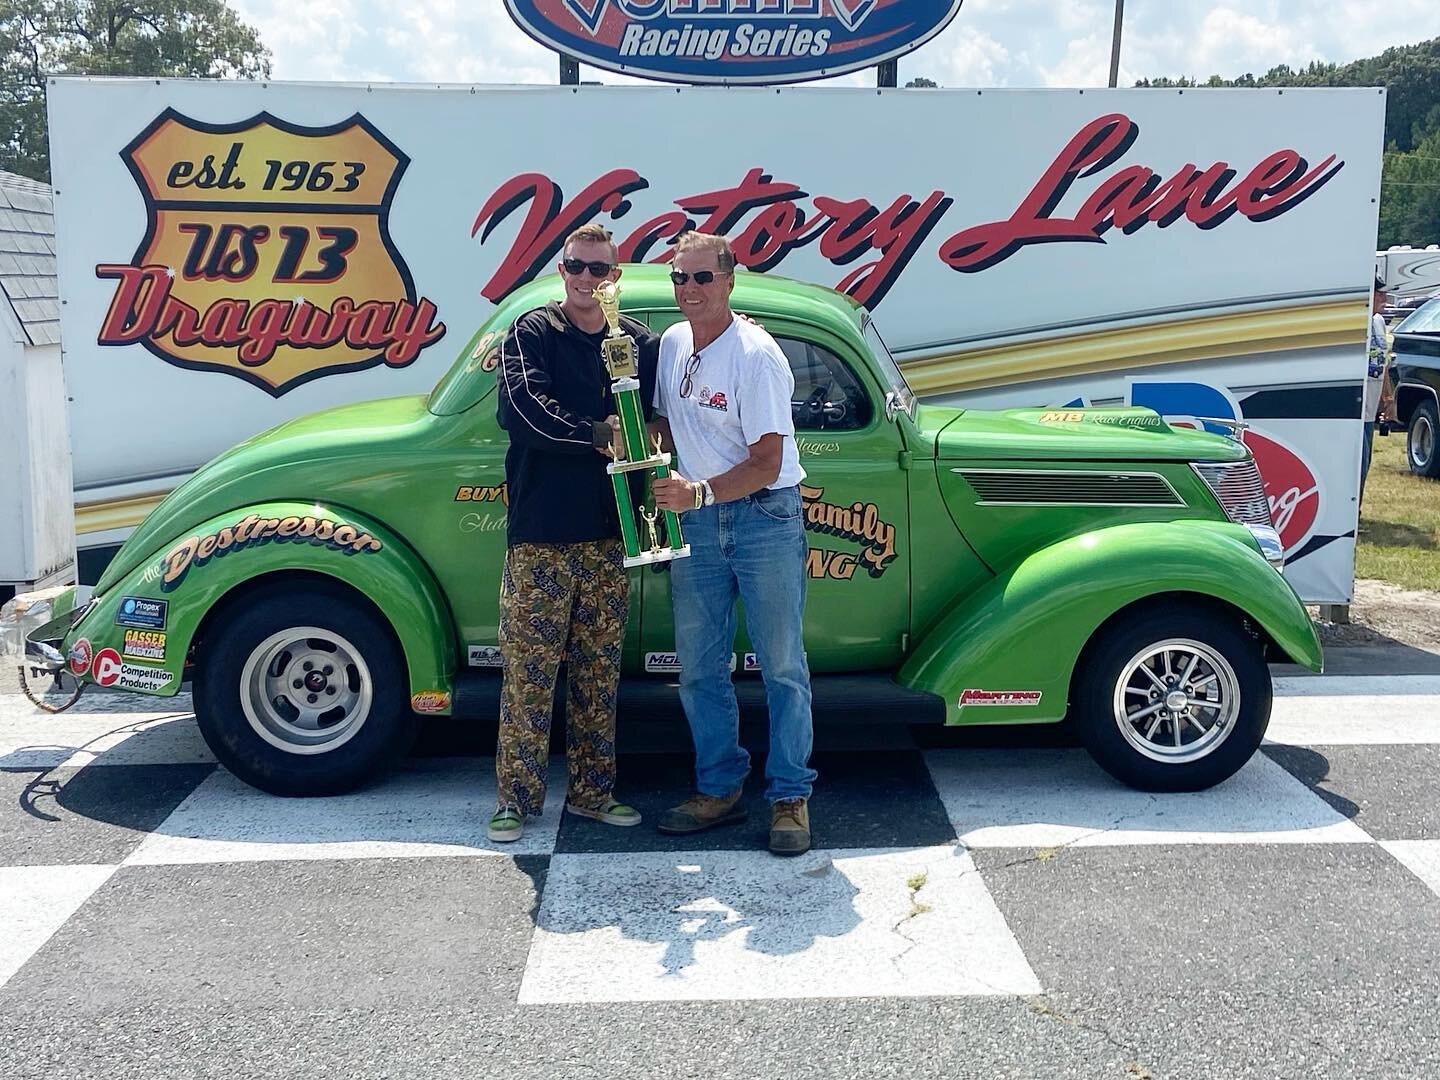 What a wild weekend for ECG&rsquo;s first trip out to US 13 Dragway in Delmar, DE! 

And no&mdash;you&rsquo;re not seeing double&mdash;we had a back to back win by @magers16 with the #MagersFamilyRacing crew, taking home 🥇 both days in a row! Lots t